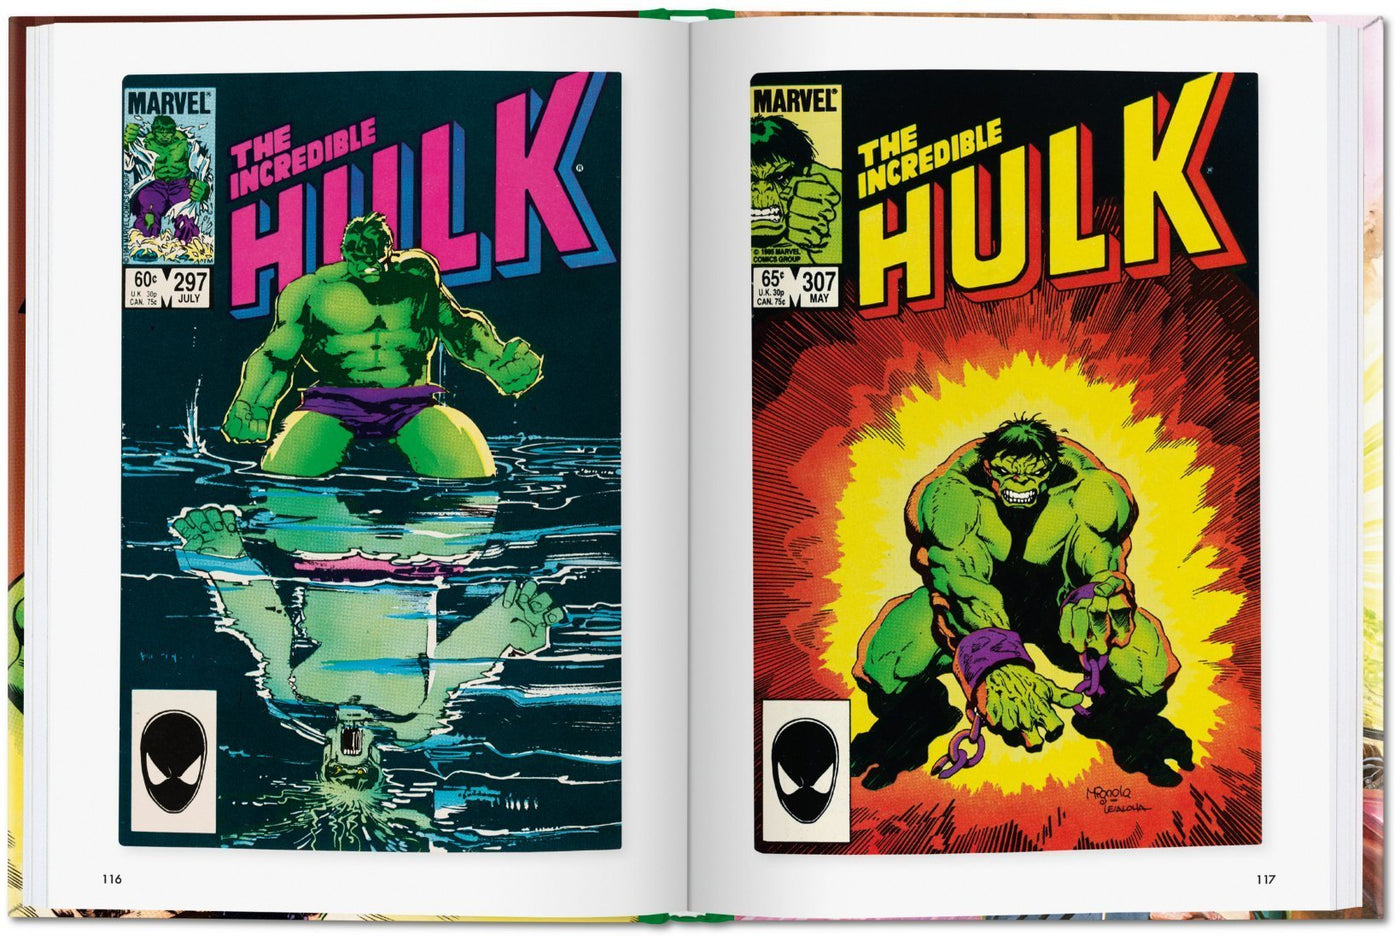 Marvel: Little Book Of The Incredible Hulk